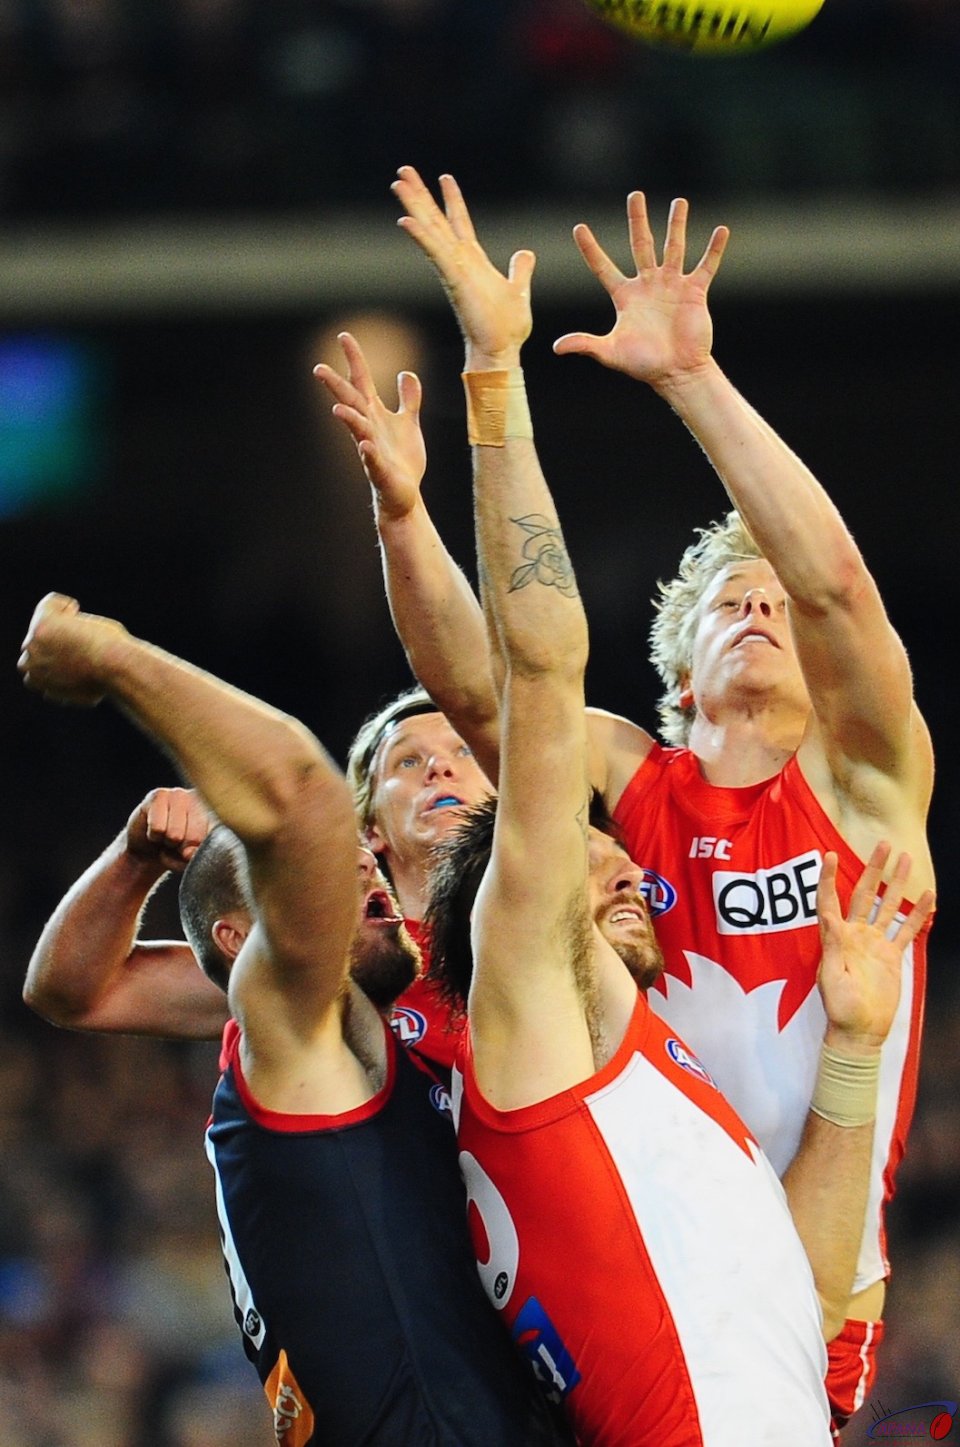 Isaac Heeney at the top of the pack